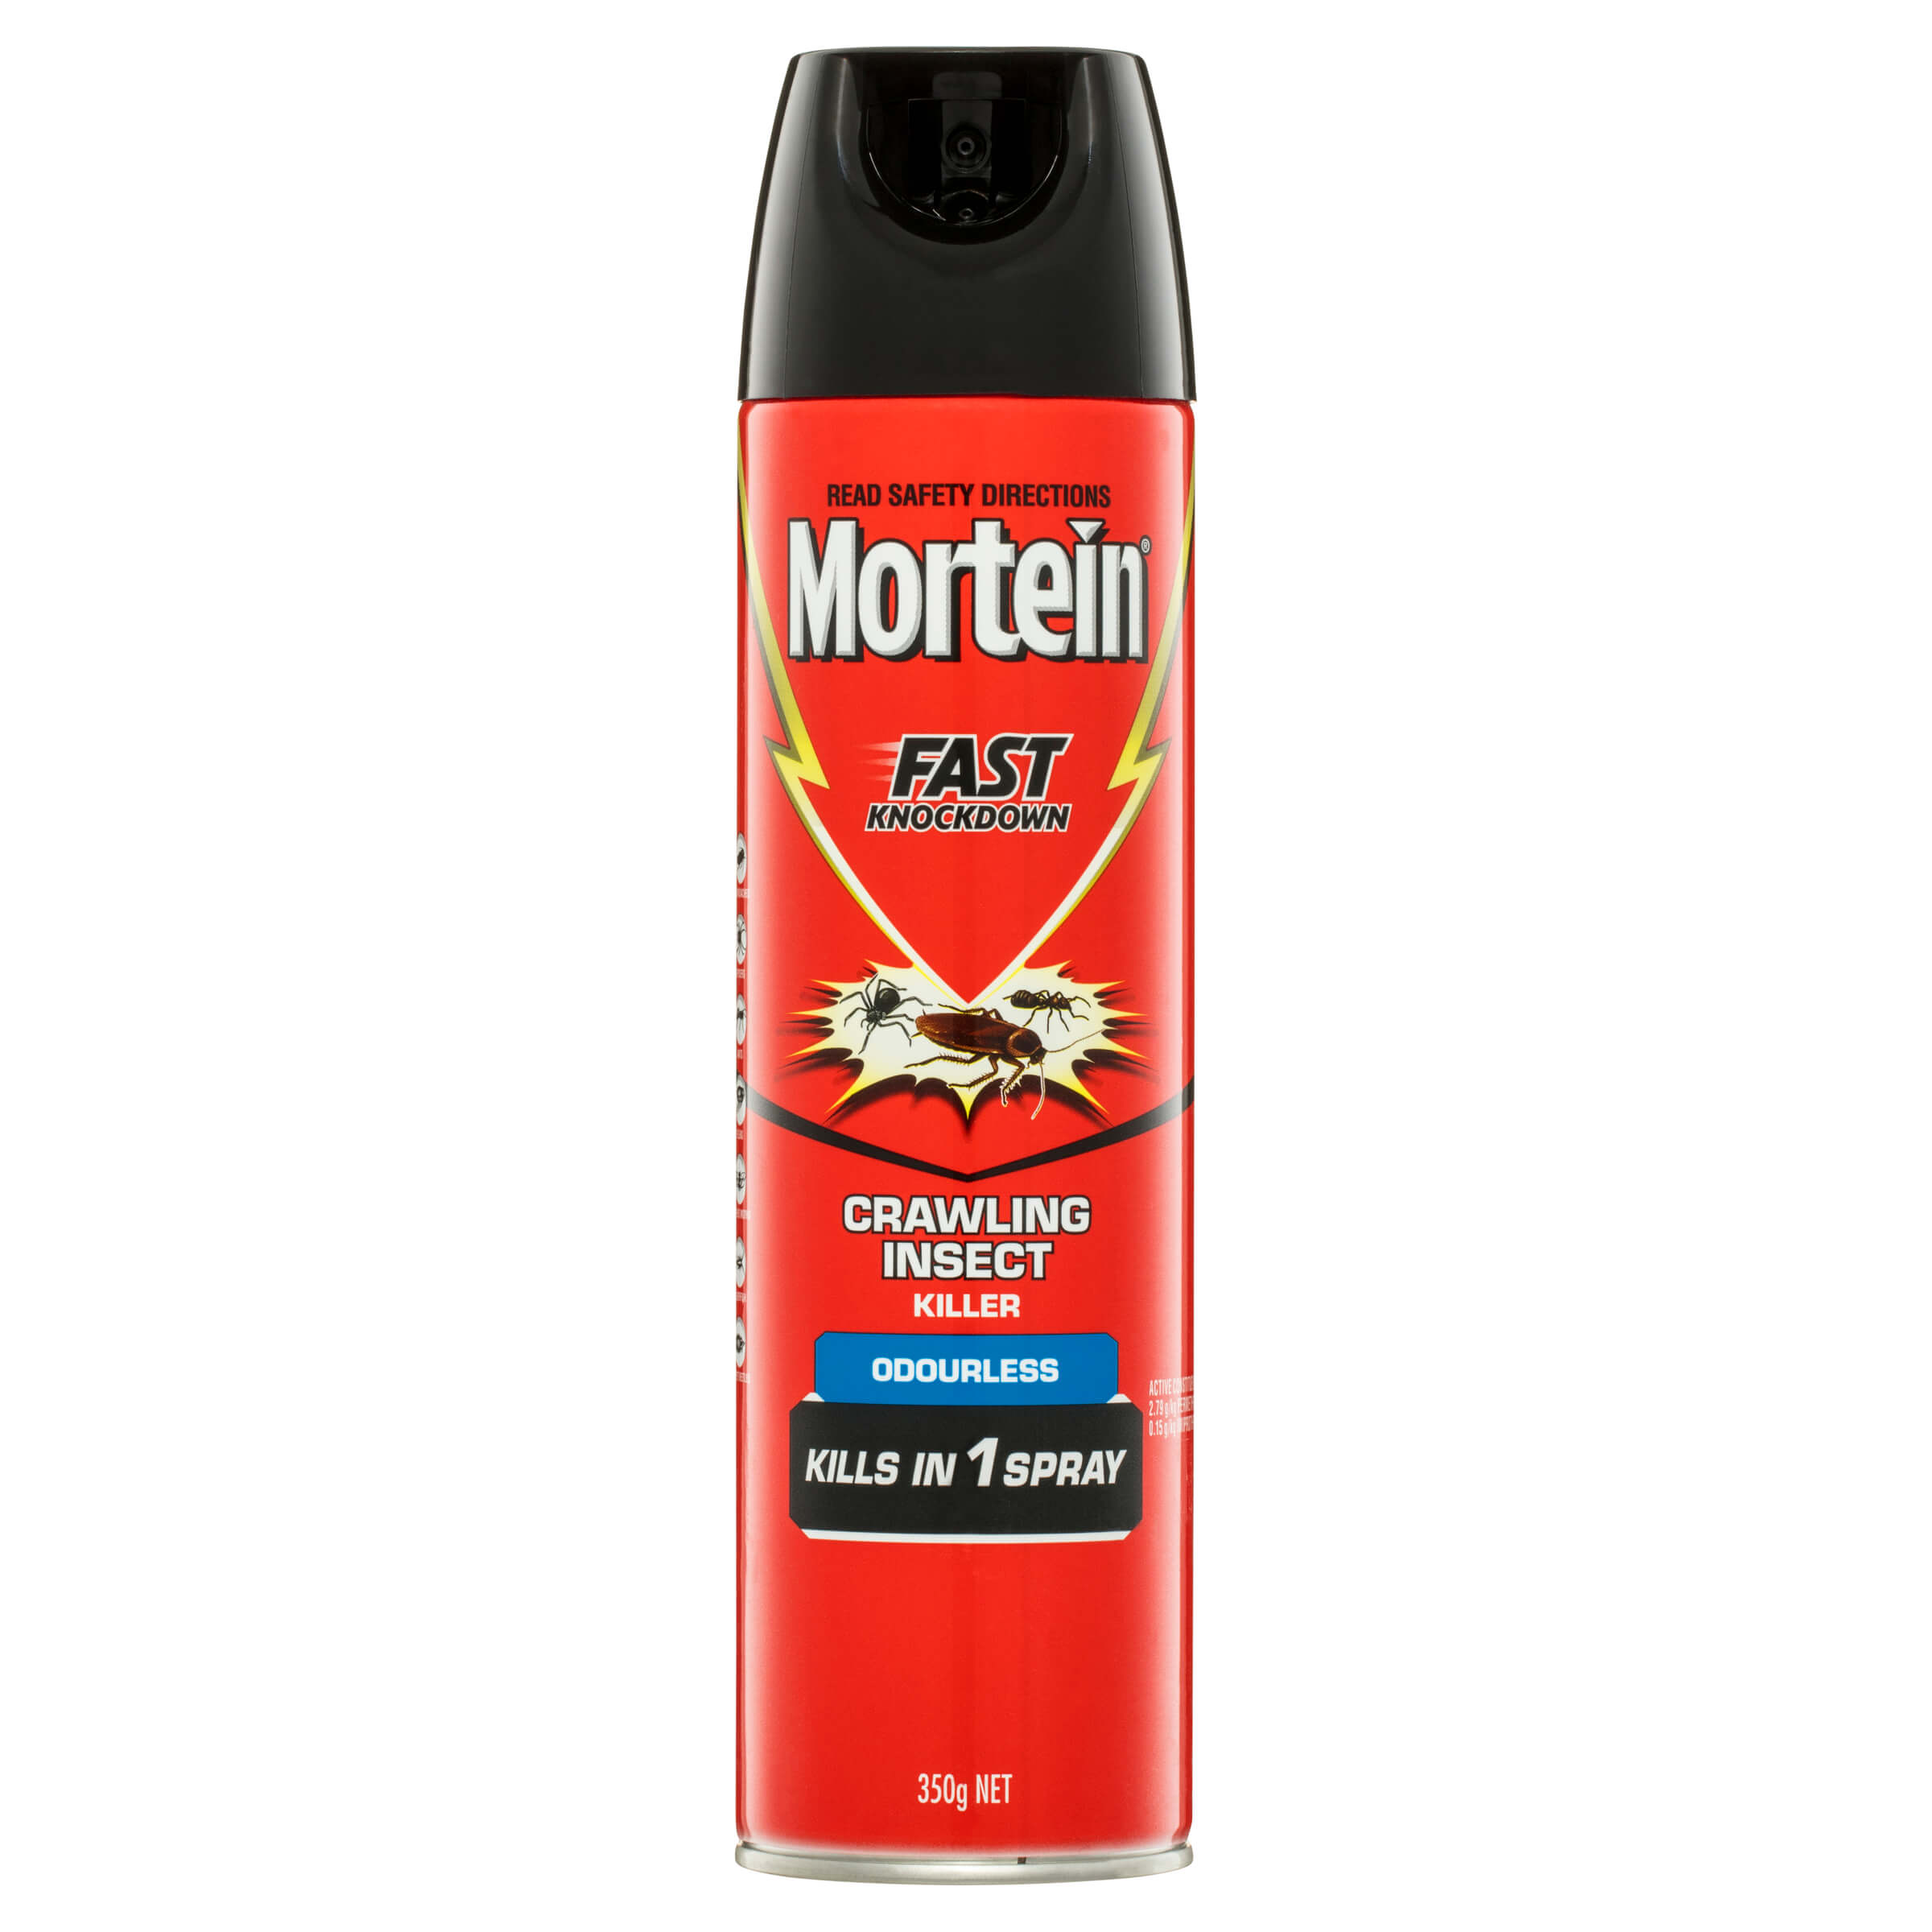 https://www.mortein.com.au/media/products/Mortein-Fast-Knockdown-Crawling-Insect-Killer-Odourless-350g.jpg